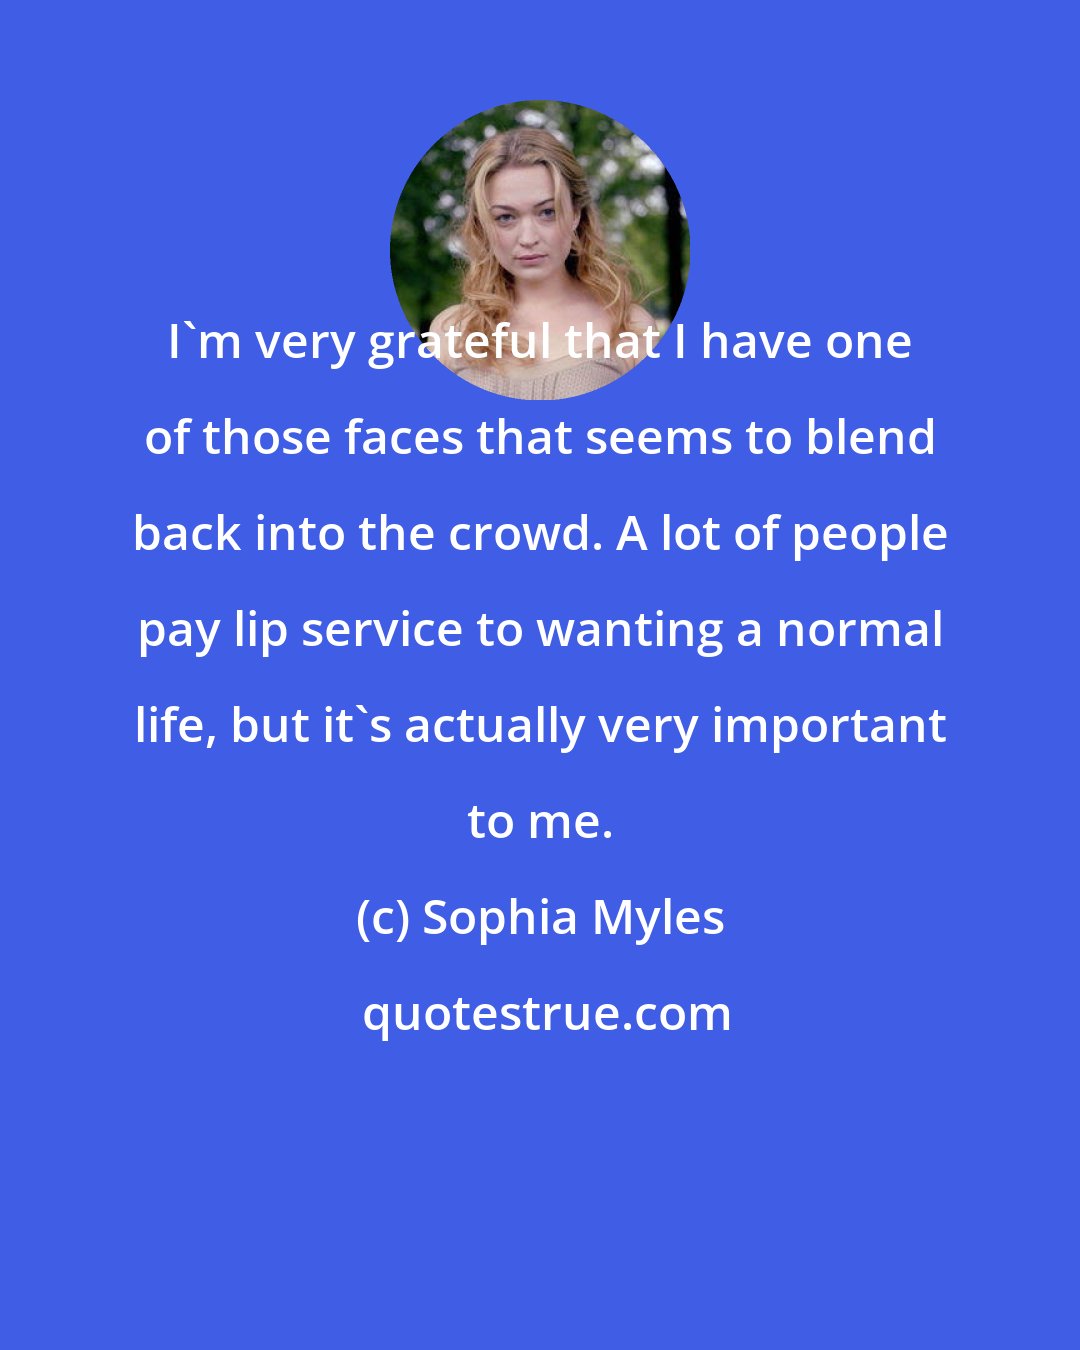 Sophia Myles: I'm very grateful that I have one of those faces that seems to blend back into the crowd. A lot of people pay lip service to wanting a normal life, but it's actually very important to me.